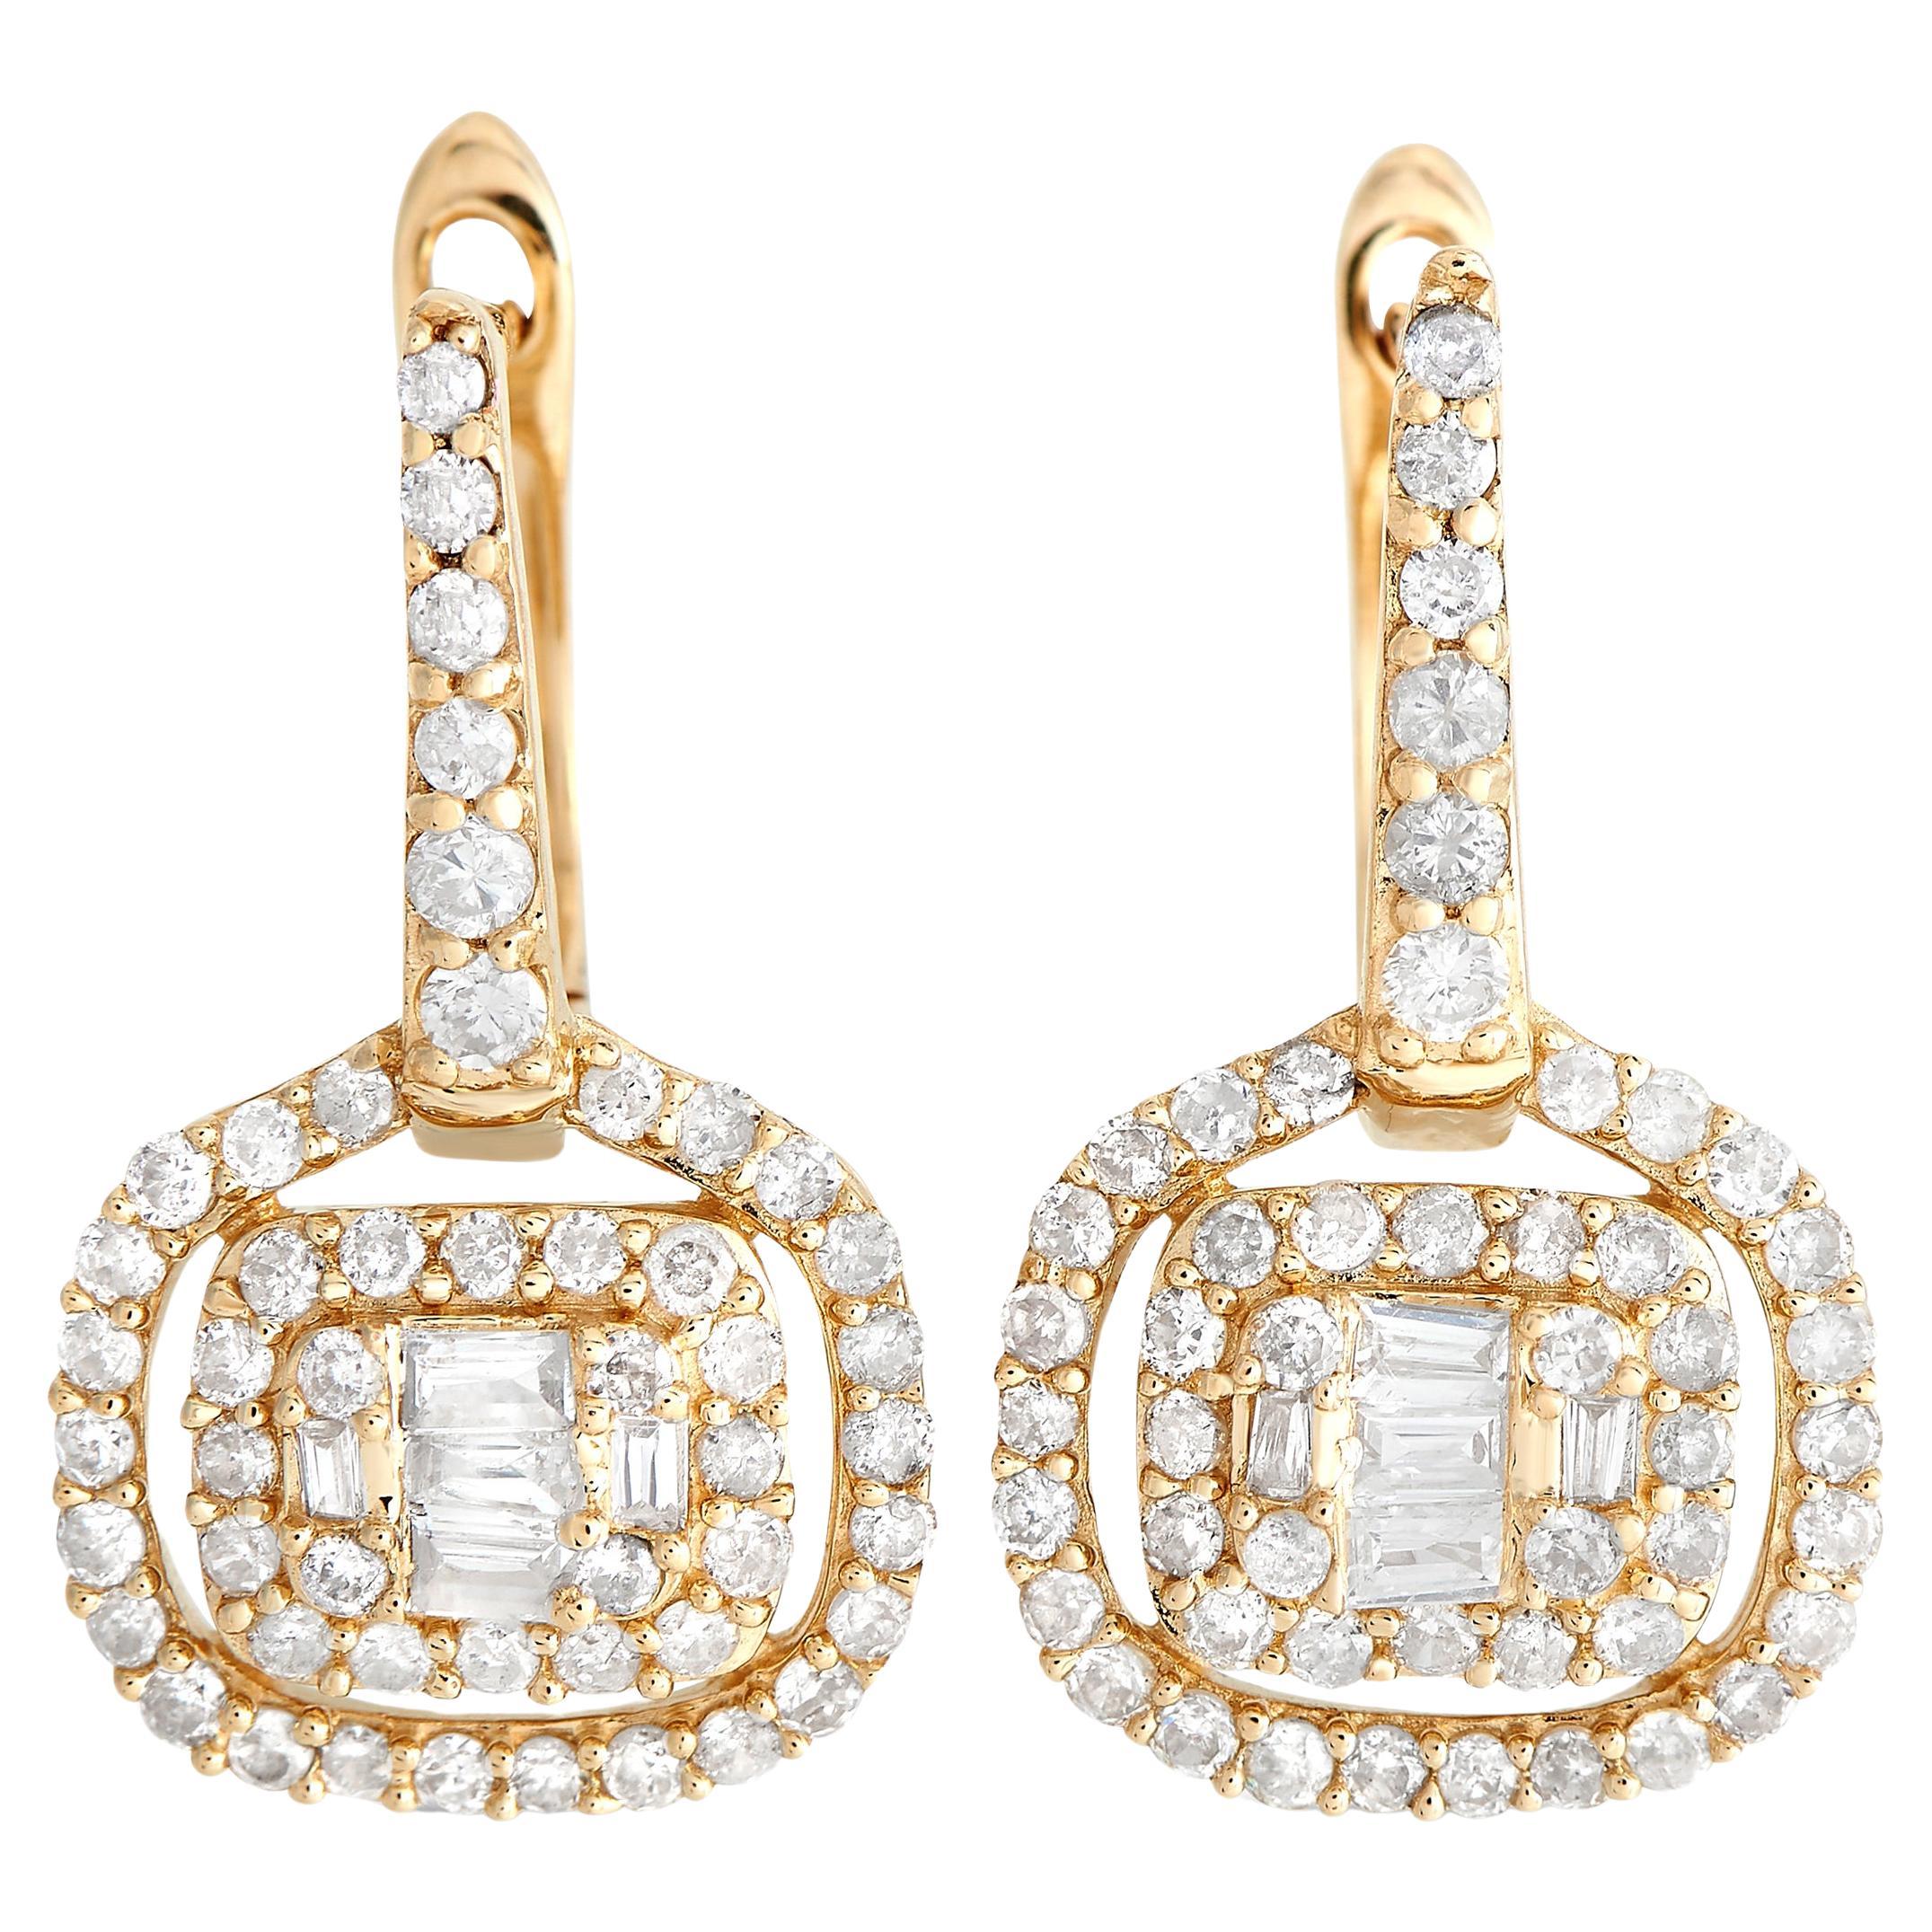 LB Exclusive 14K Yellow Gold 0.68ct Diamond Earrings ER27898 For Sale